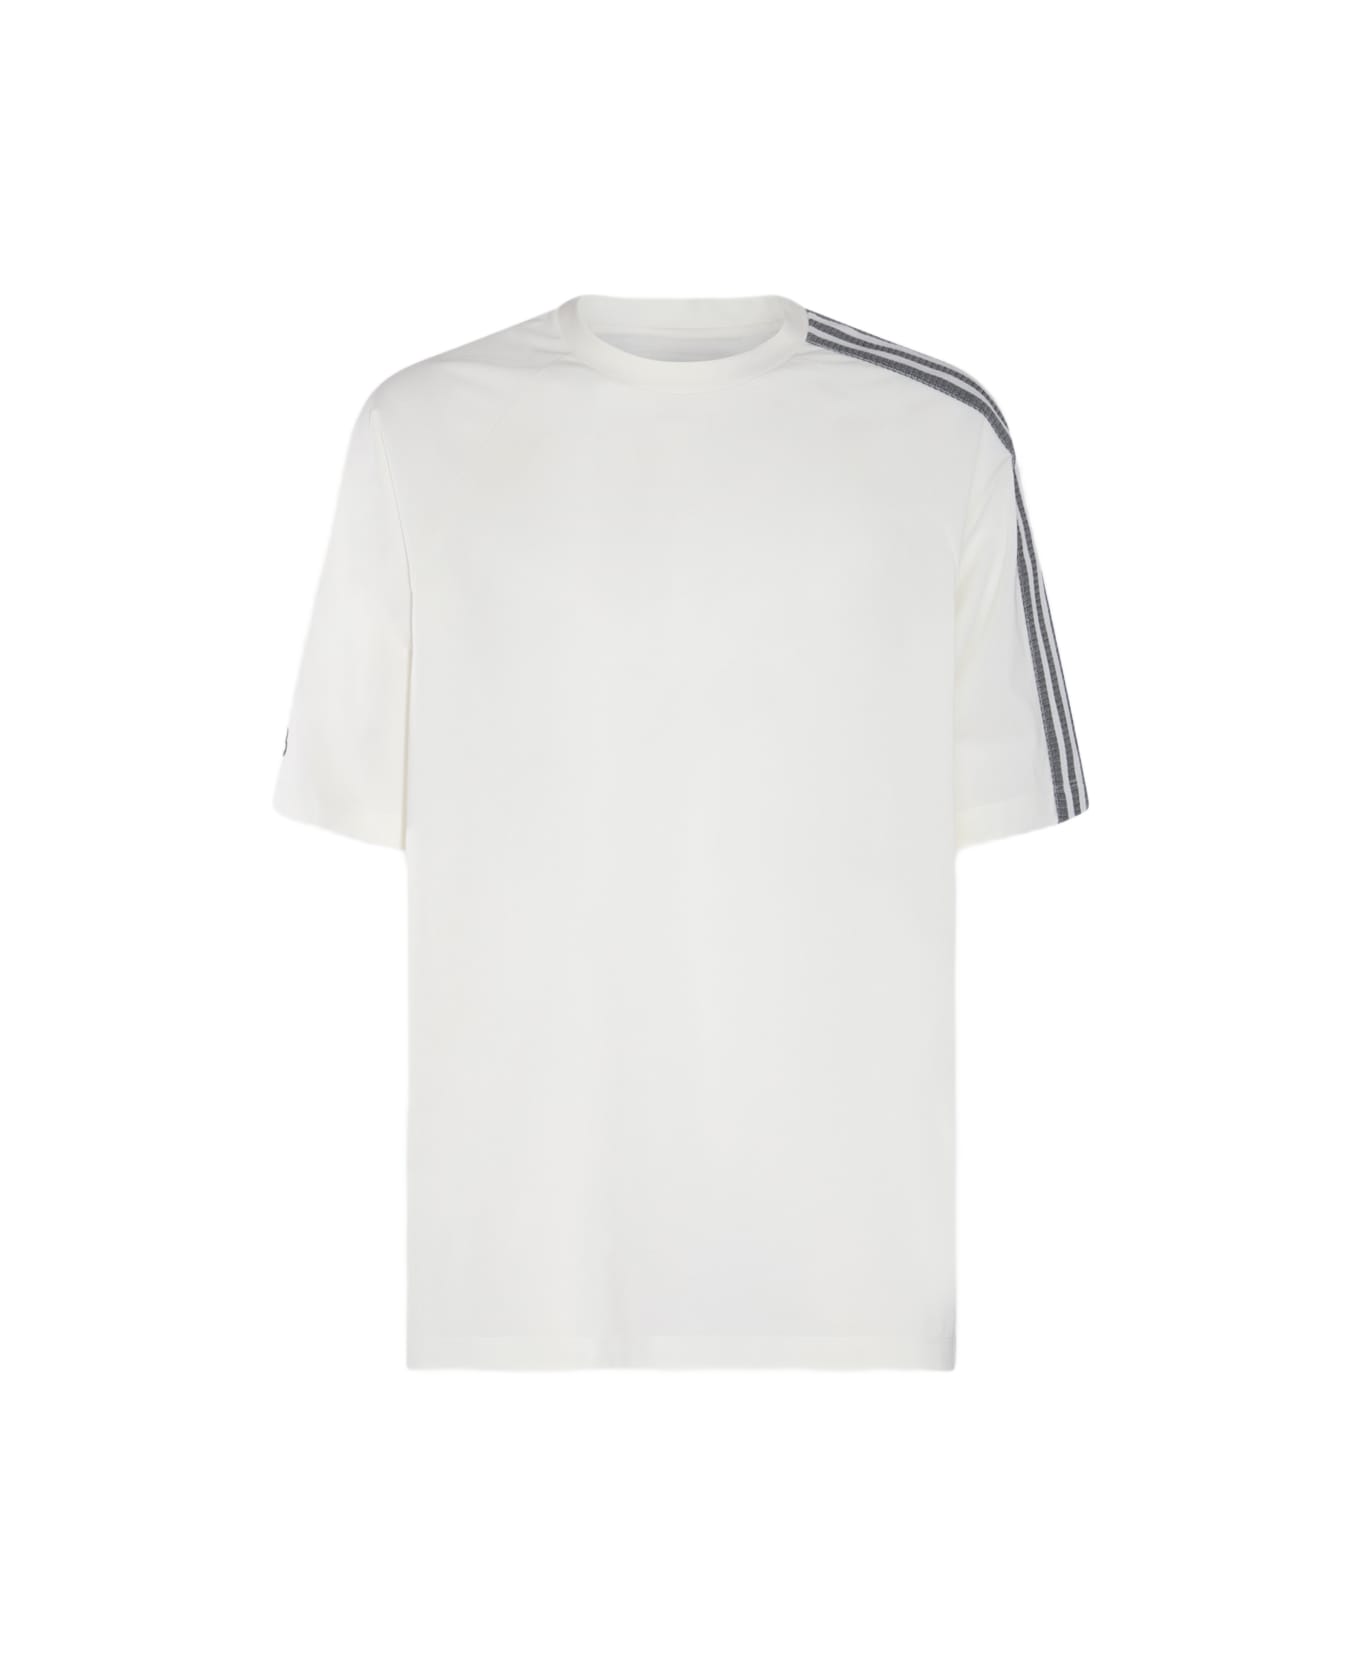 Y-3 White And Grey Cotton T-shirt - Beige